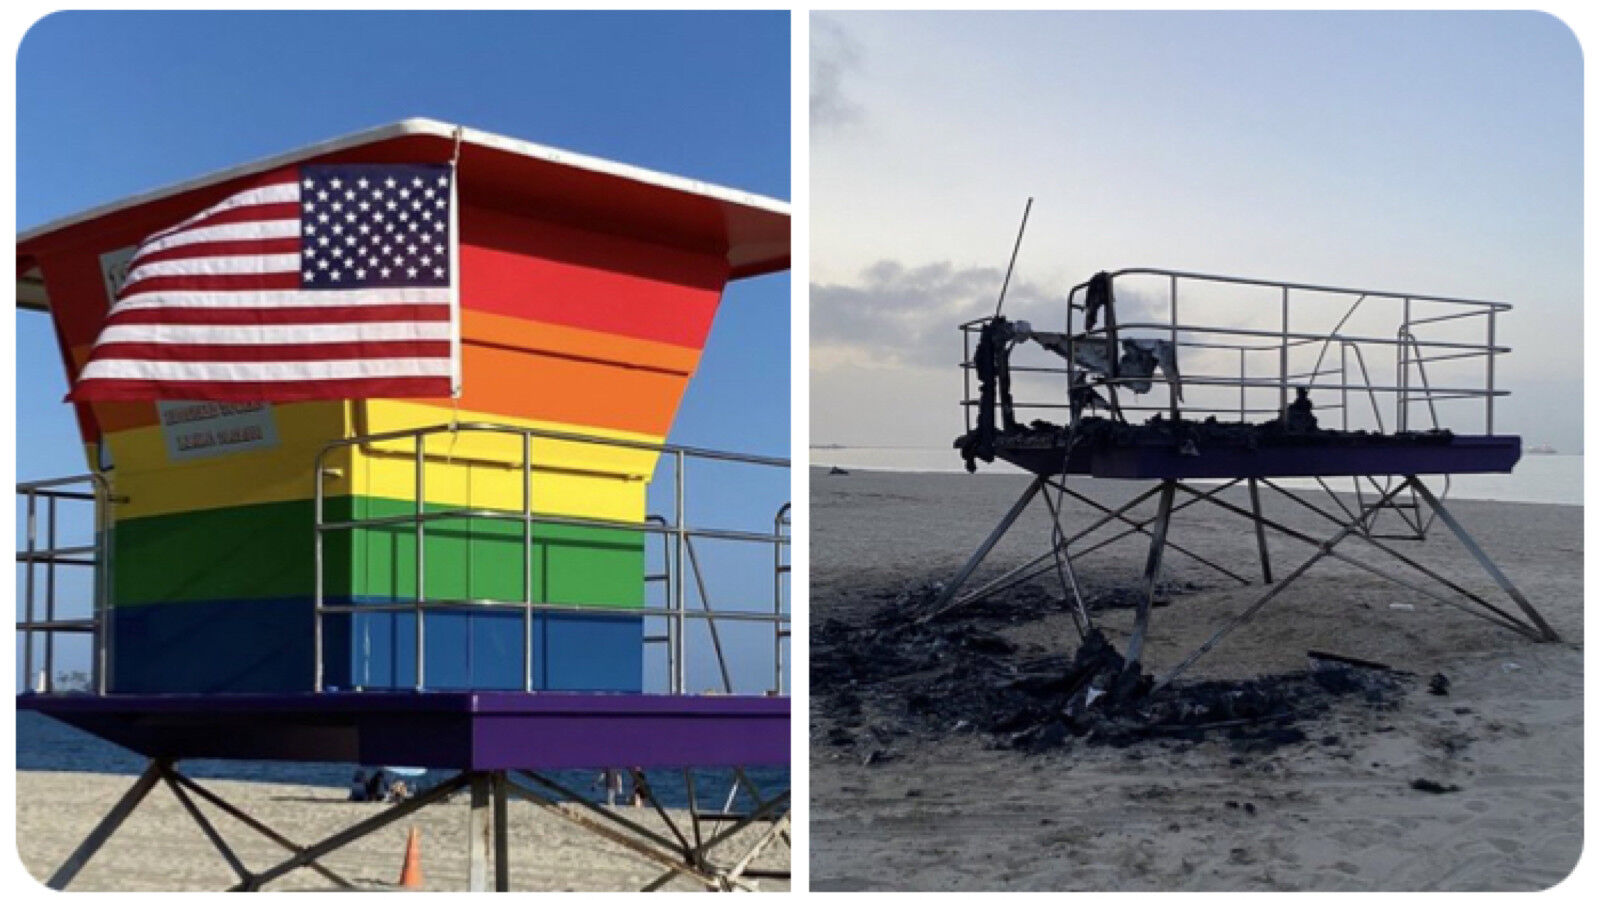 The Pride lifeguard station on Long Beach before and after the fire on March 23, 2021.